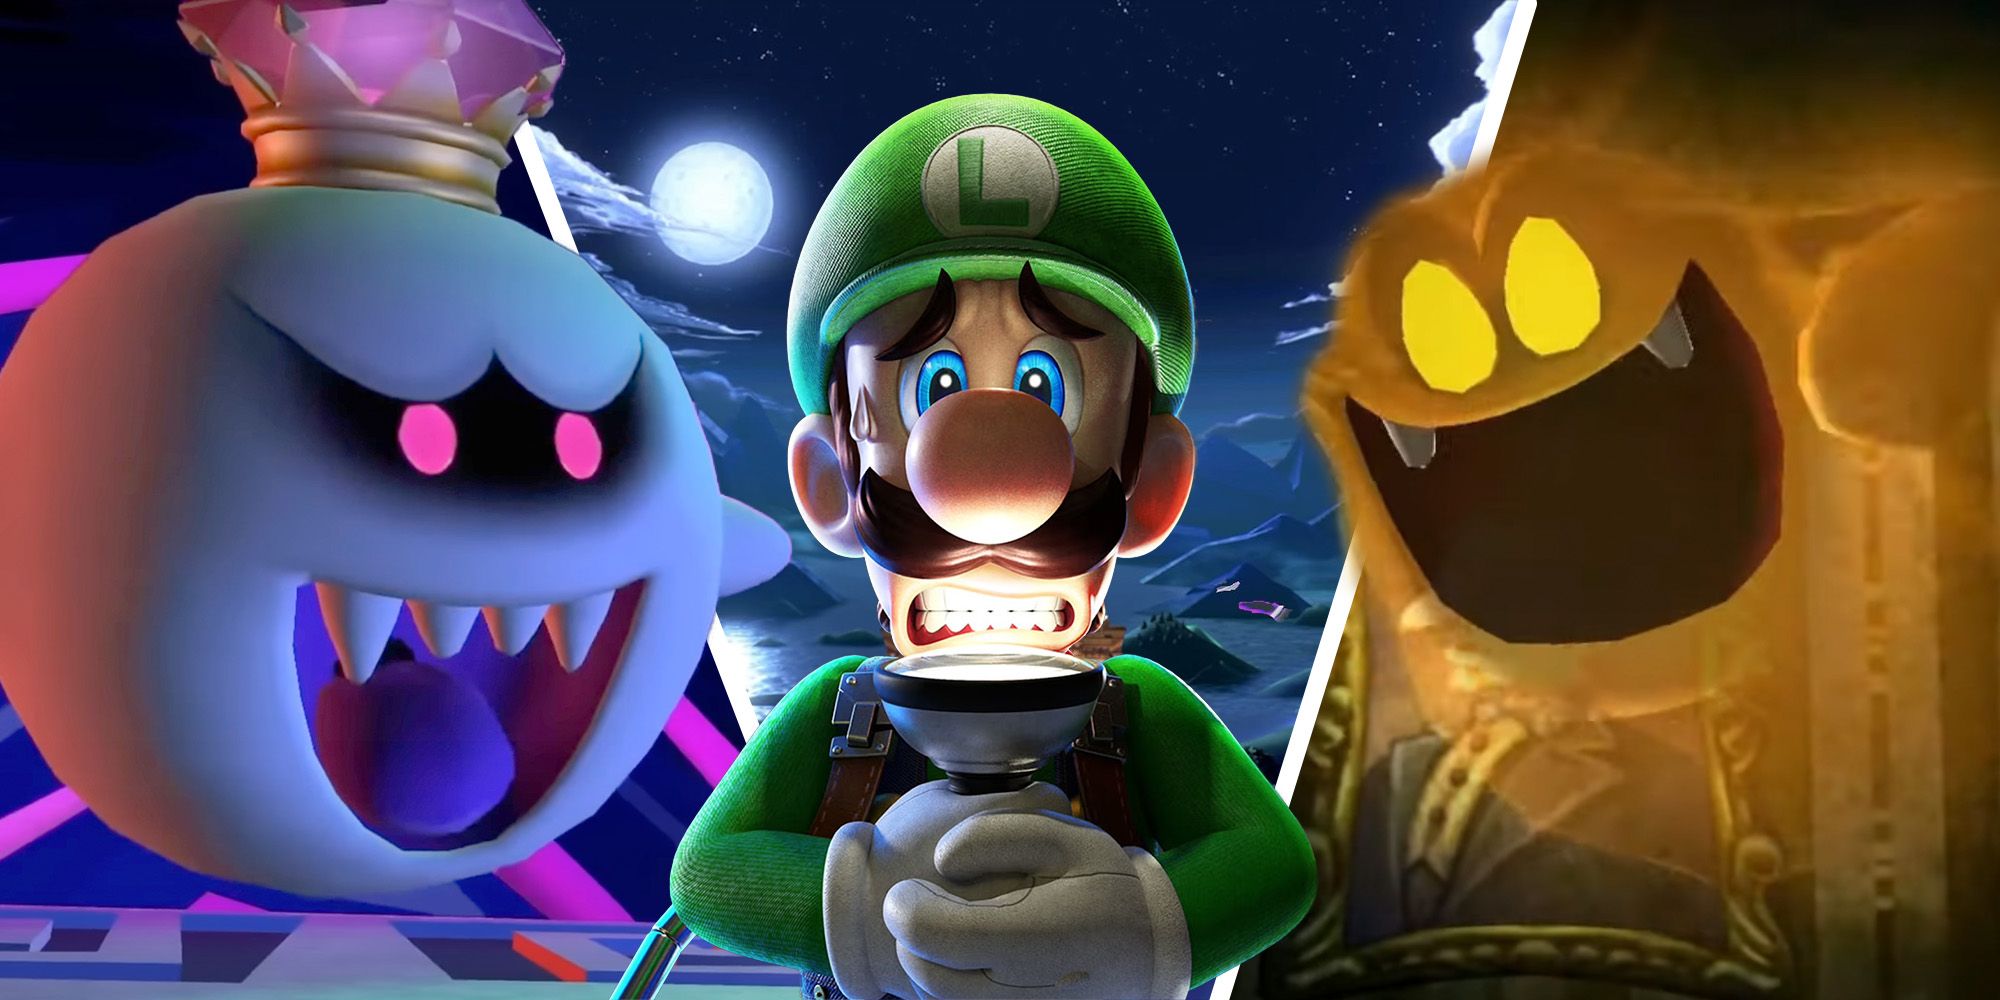 Split image of King Boo from Dark Moon, Luigi from Luigi's Mansion 3, and the organe ghost from Luigi's Mansion GameCube and 3DS